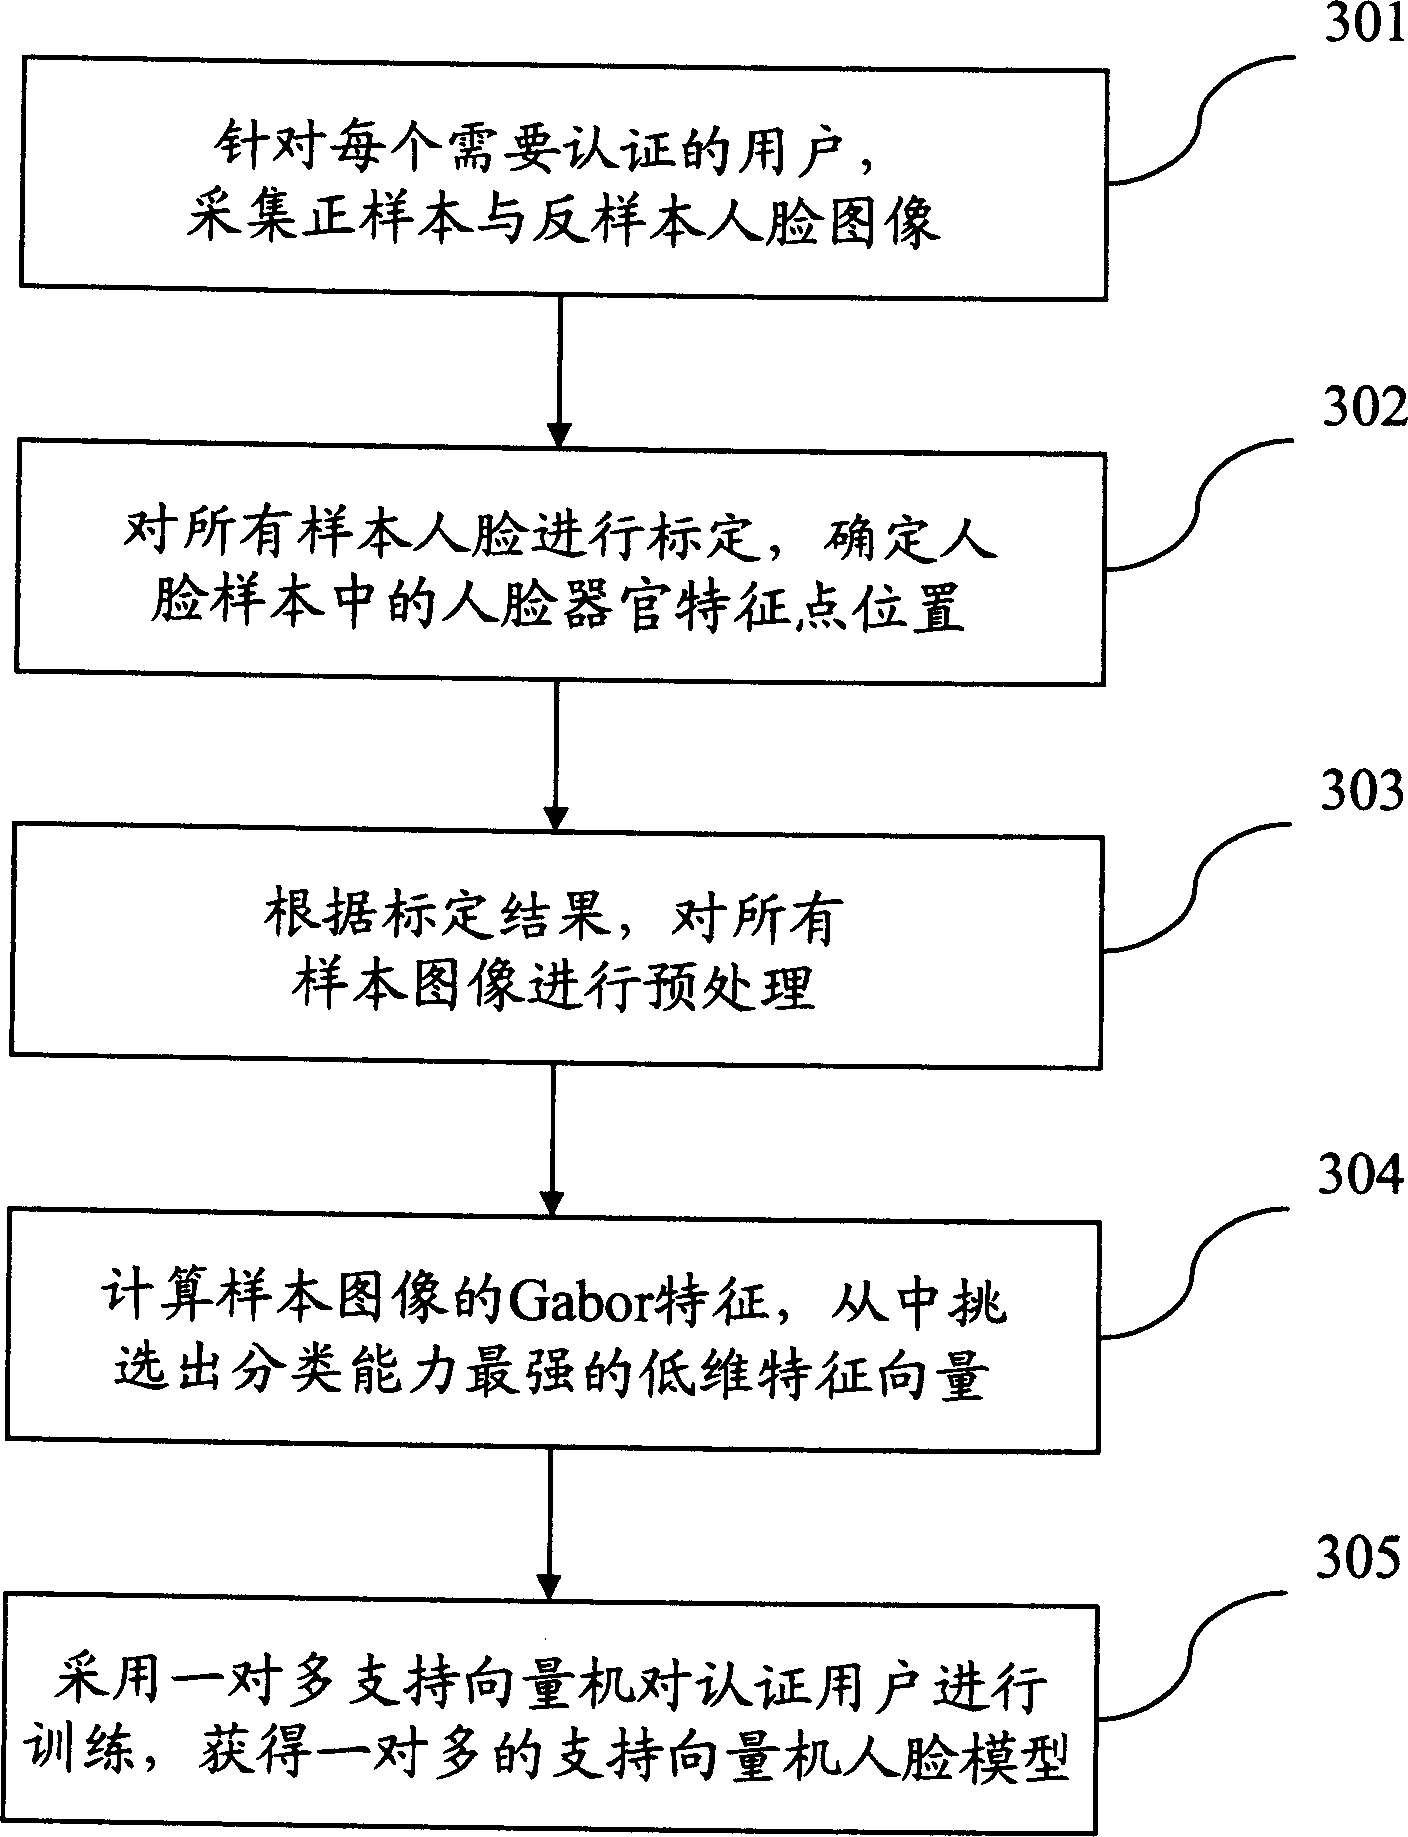 Screen protection method and apparatus based on human face identification